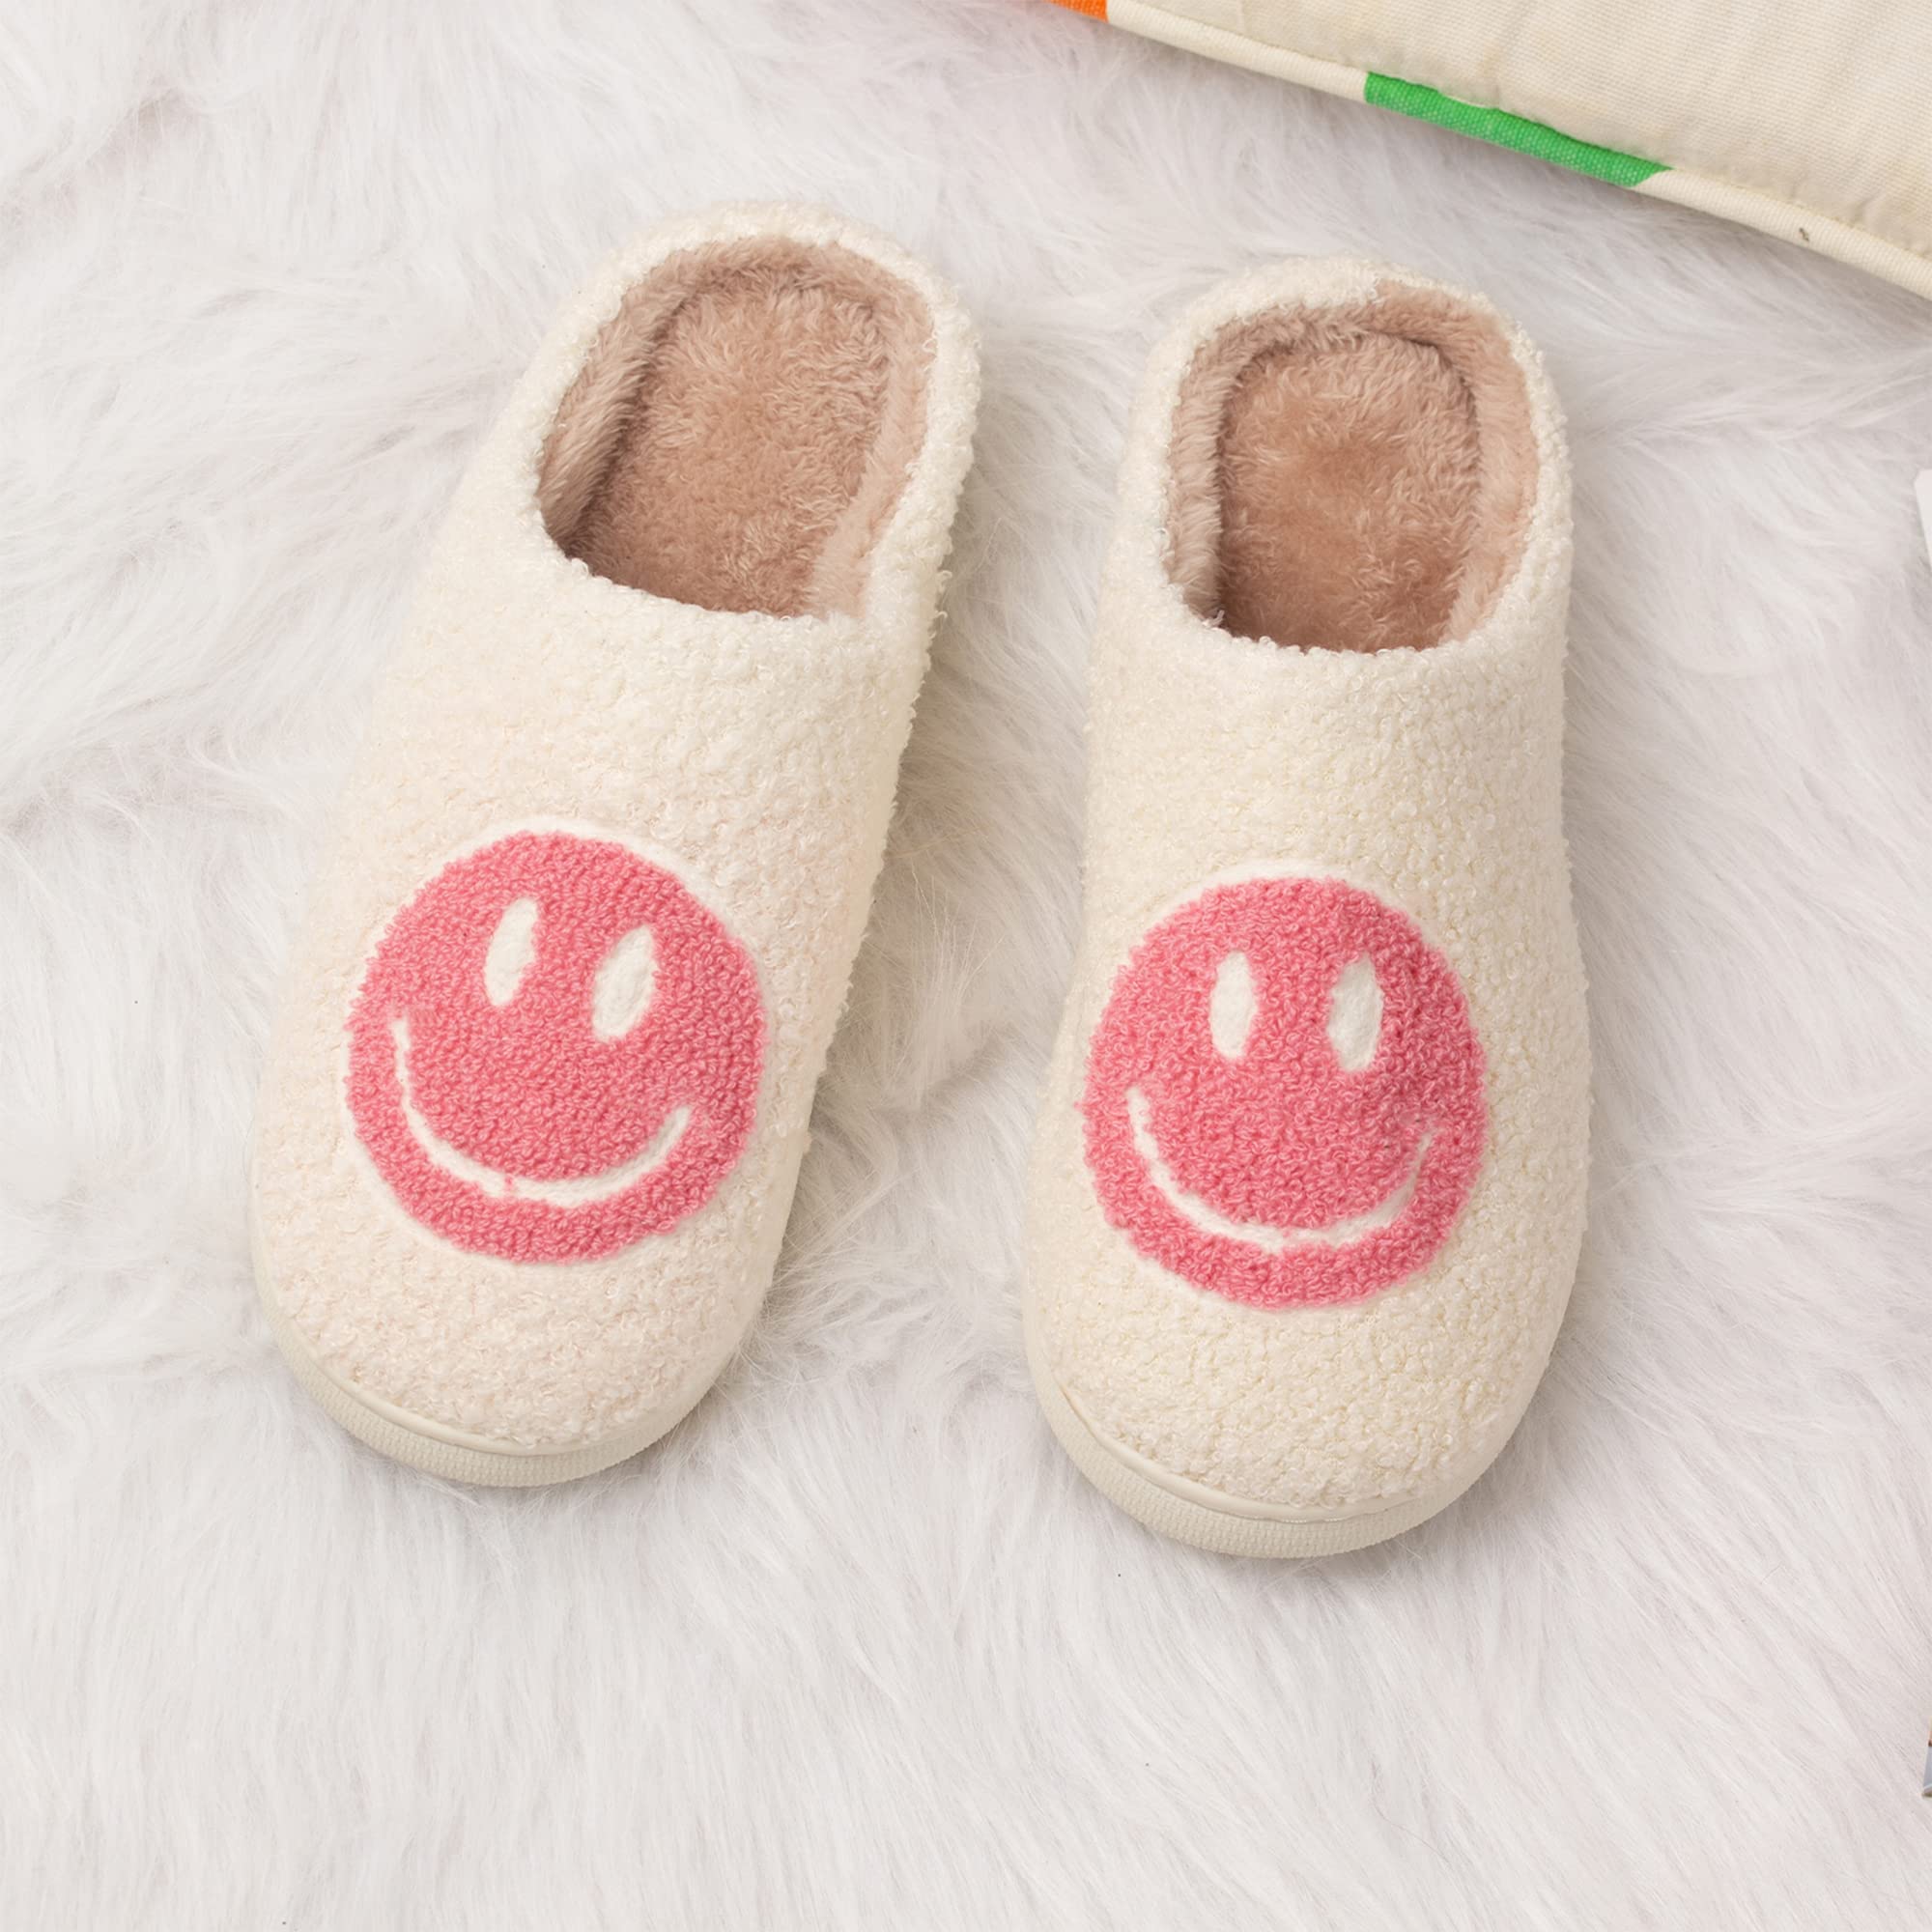 DepiYorSn Happy Face Slippers Retro Cozy Comfy Plush Warm Slip-on Slippers Winter Soft Fuzzy Indoor House Shoes with Memory Foam for Men Women…